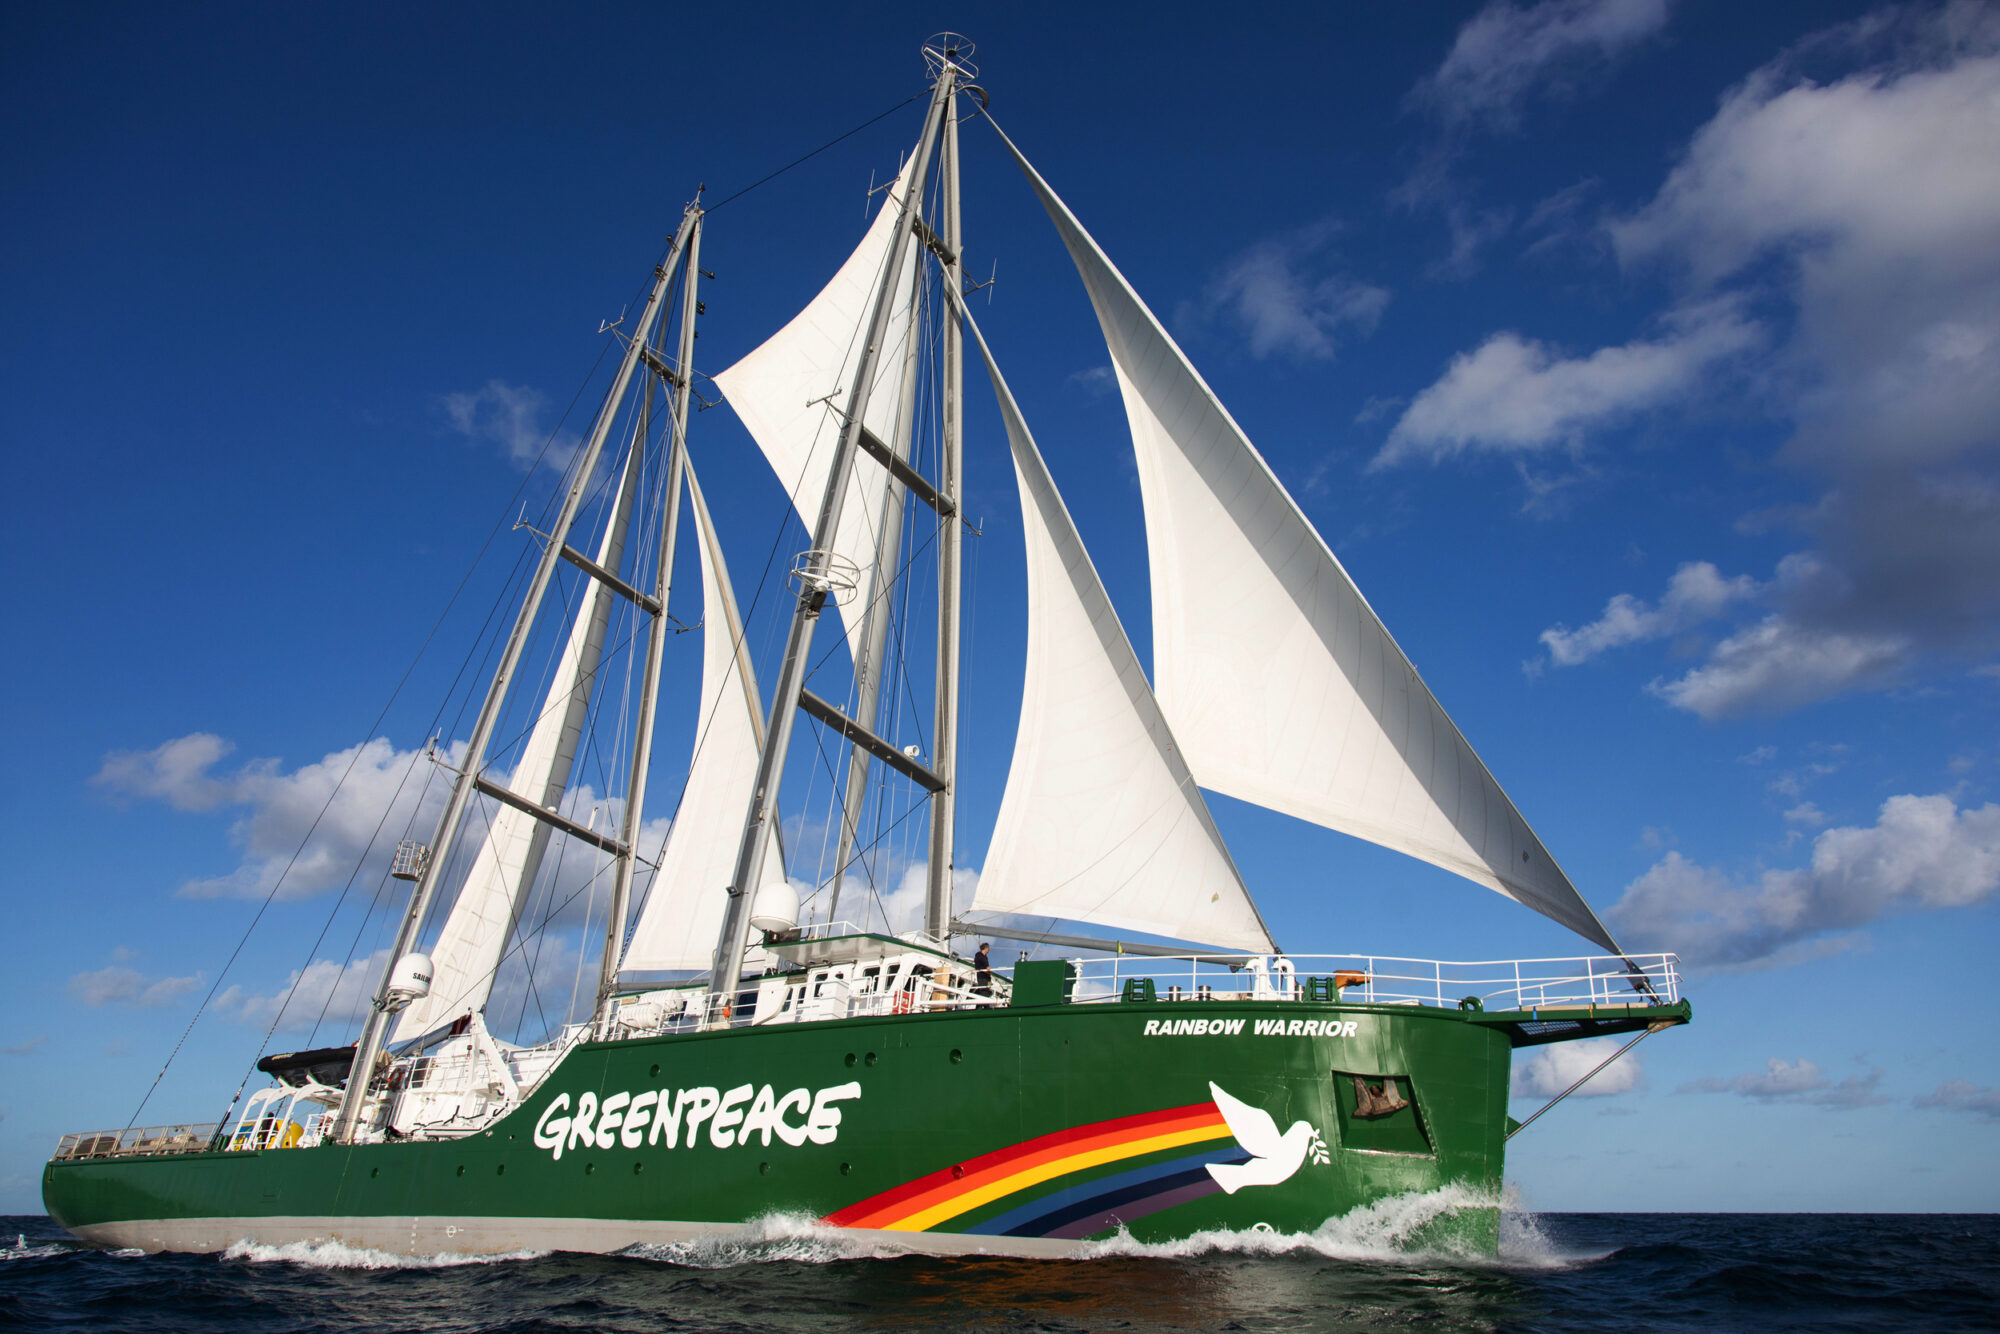 The Greenpeace ship Rainbow Warrior with beautiful white sails and a rainbow design on its bow